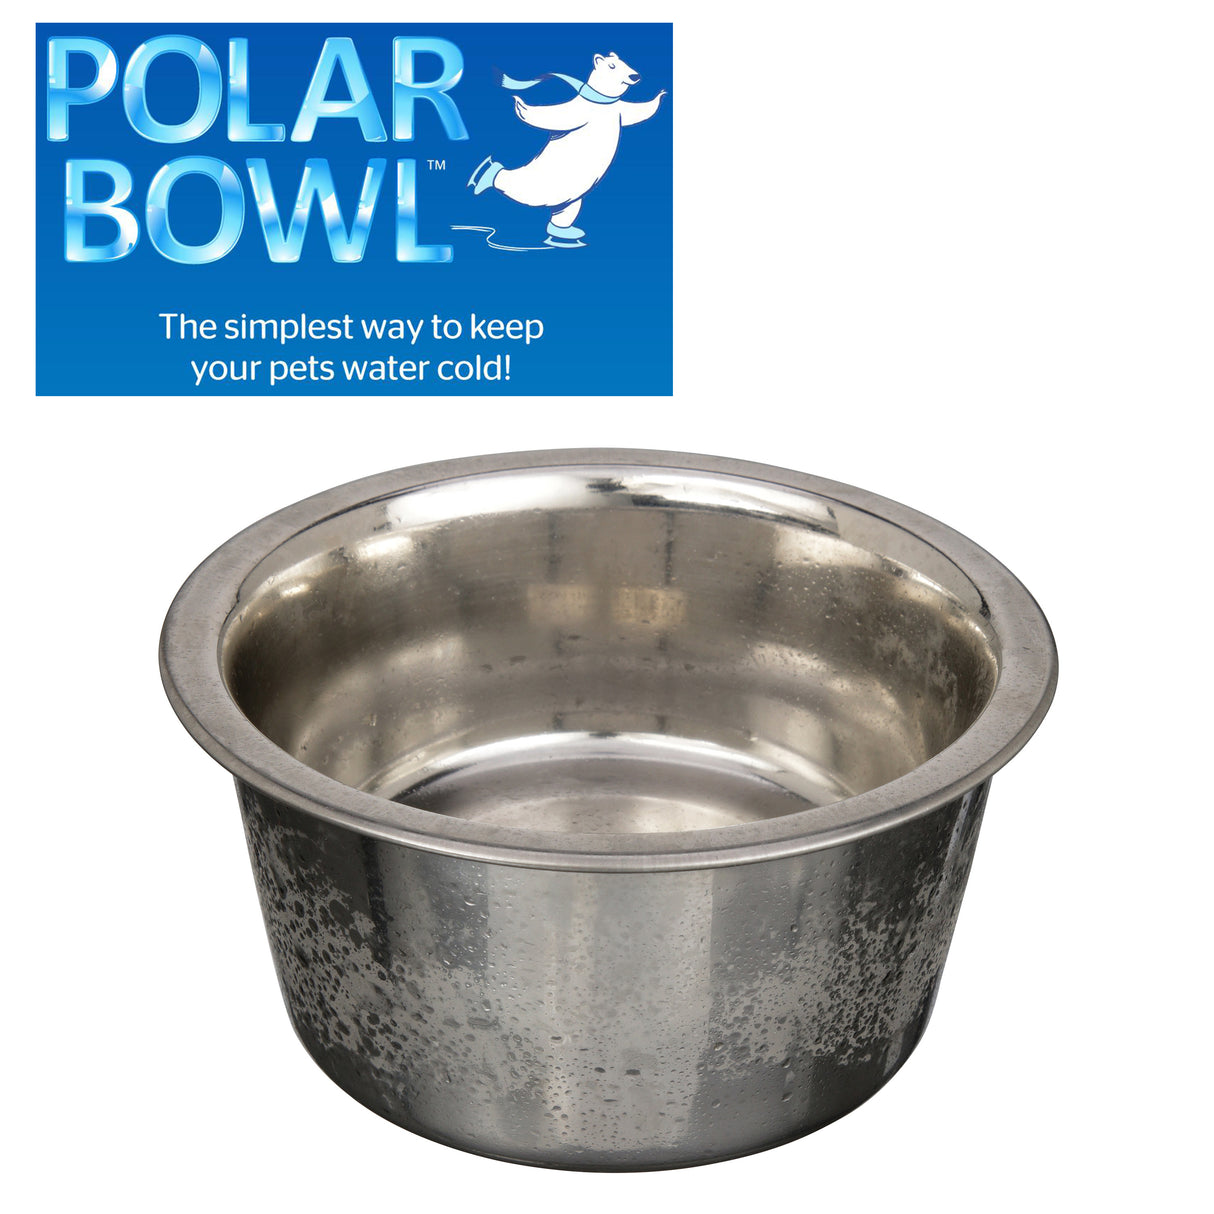 Image of frozen Polar bowl with logo - simplest way to keep your pets water cold!